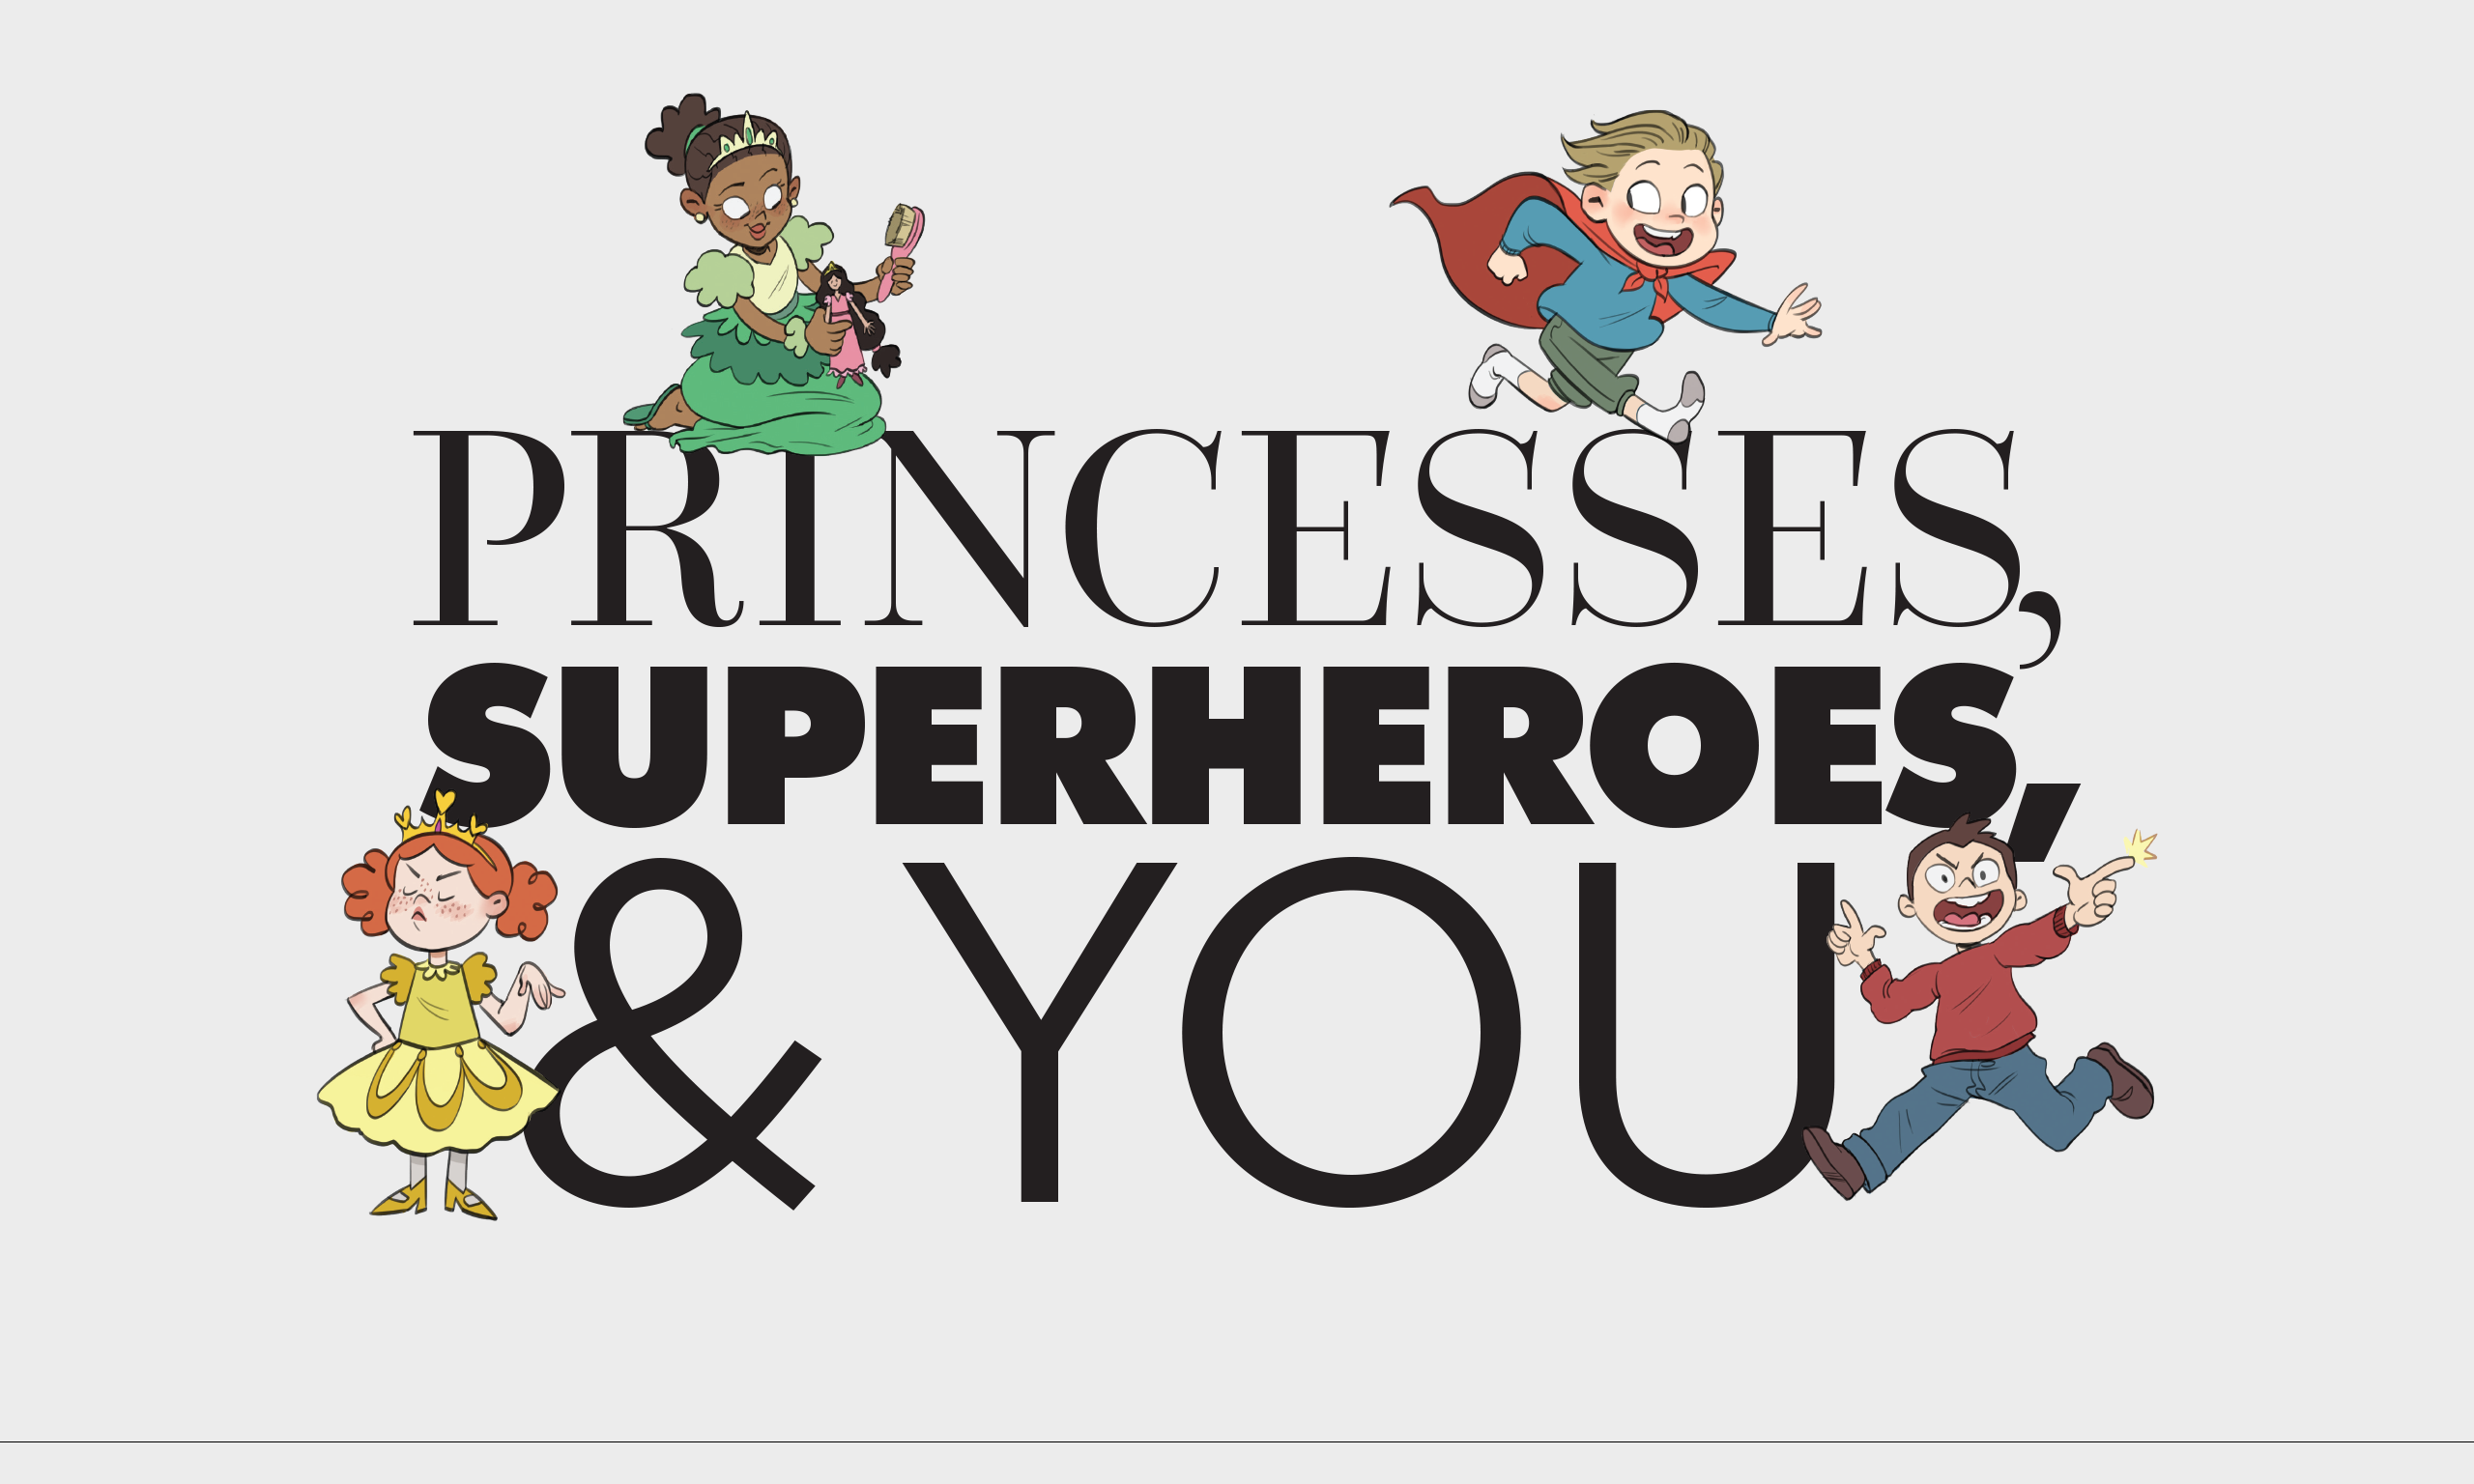 Typographic treatement of magazine article title: Princesses, Superheroes, and You